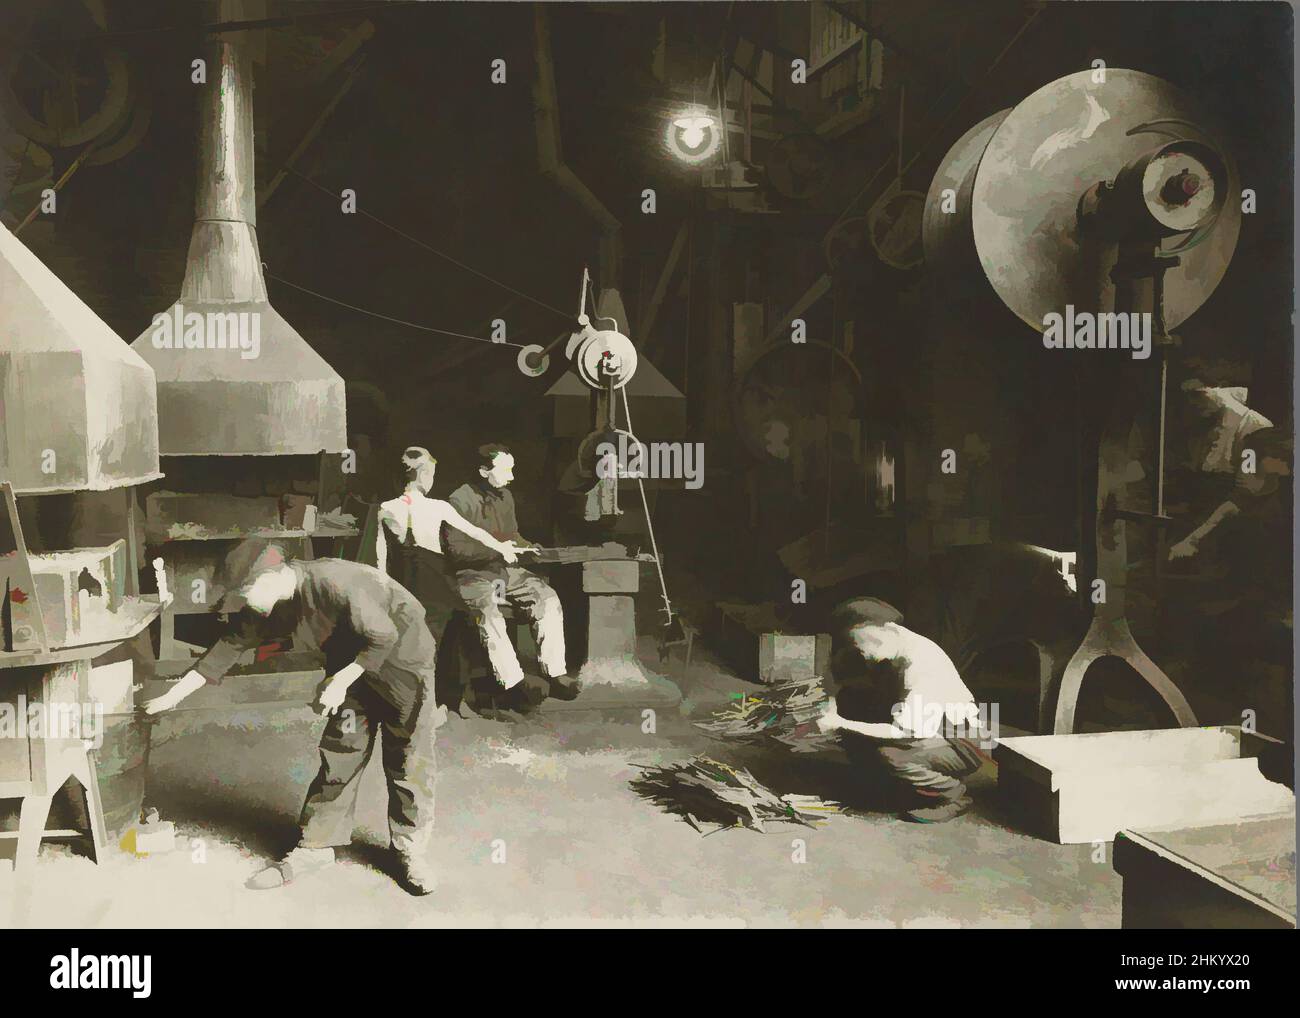 Art inspired by Workers in a metalworking factory, including three children, Press photo., France, c. 1910, baryta paper, gelatin silver print, height 129 mm × width 179 mm, Classic works modernized by Artotop with a splash of modernity. Shapes, color and value, eye-catching visual impact on art. Emotions through freedom of artworks in a contemporary way. A timeless message pursuing a wildly creative new direction. Artists turning to the digital medium and creating the Artotop NFT Stock Photo